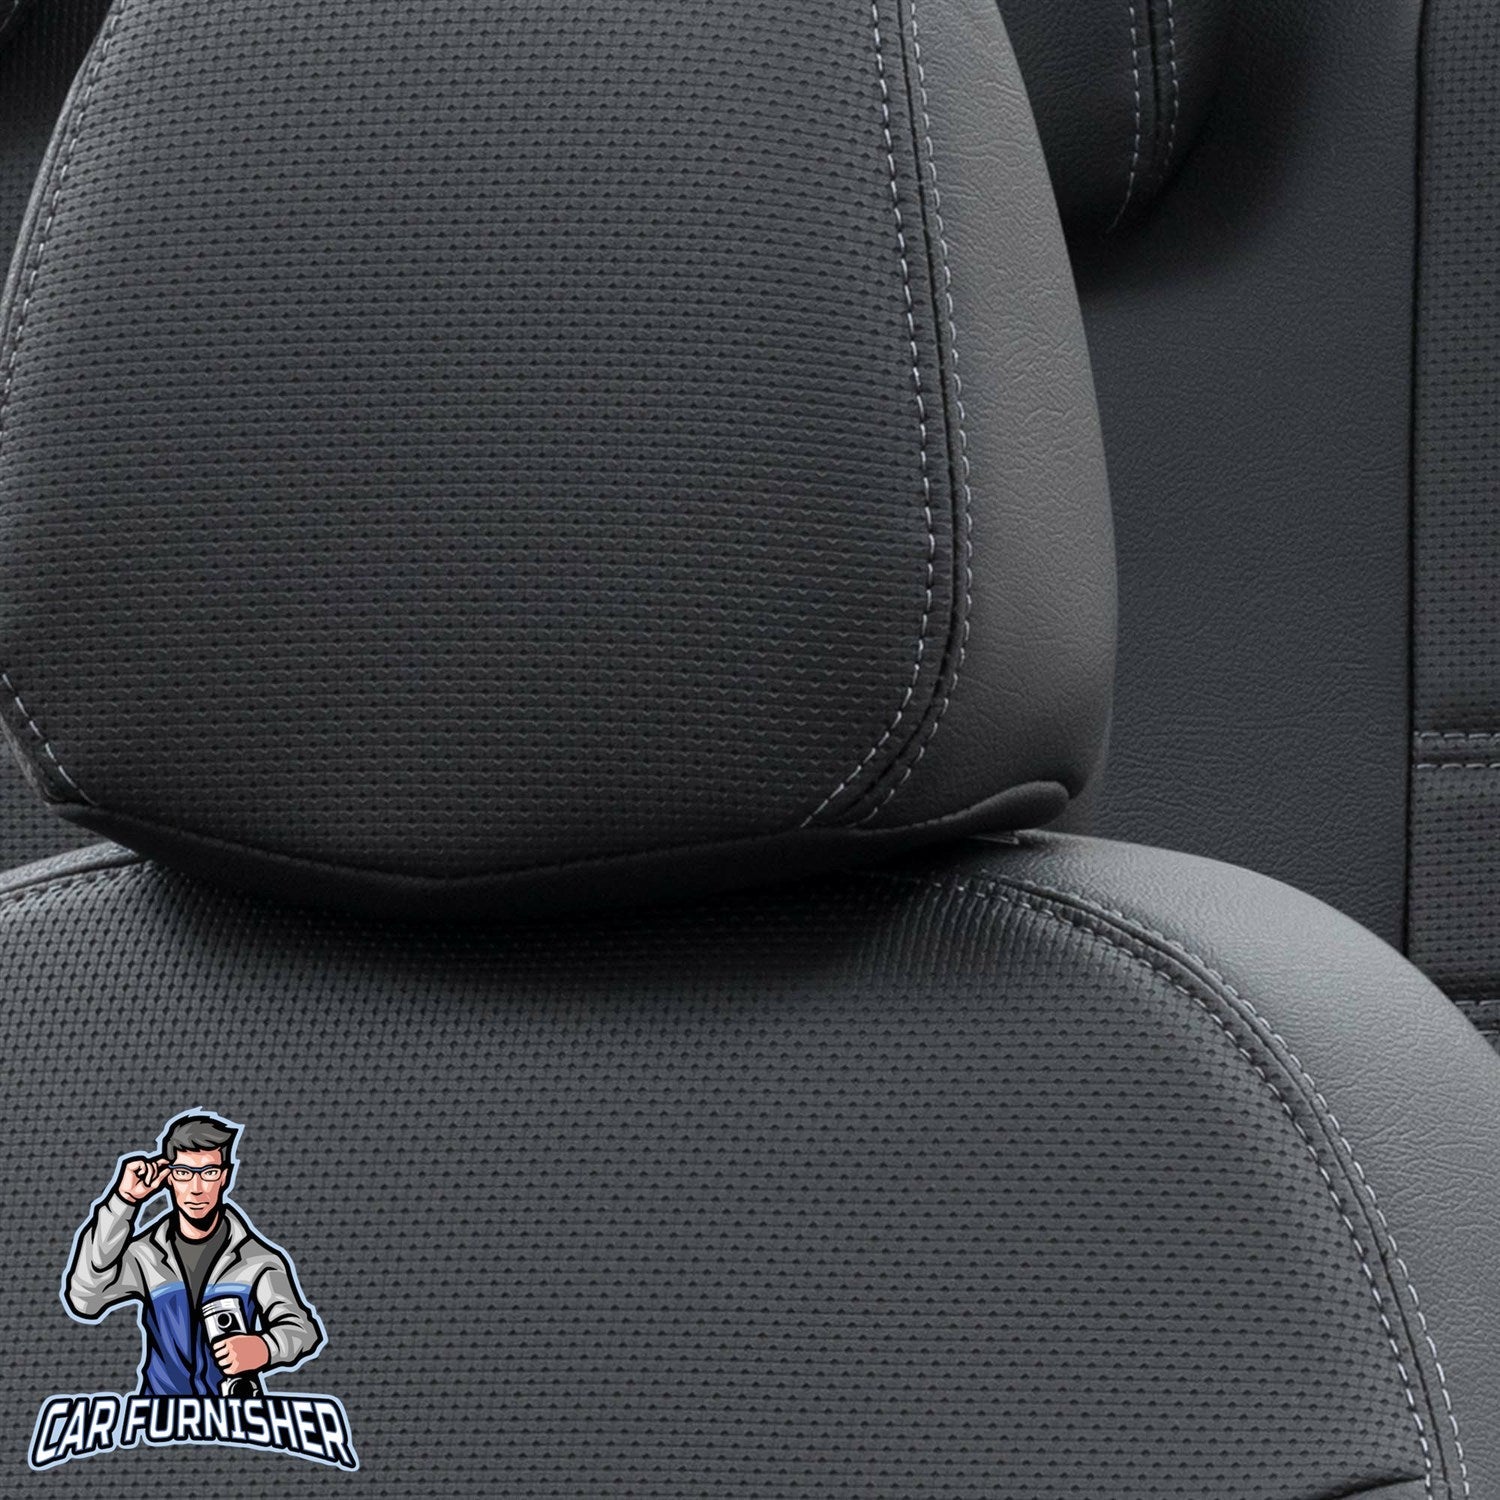 Toyota CHR Seat Cover New York Leather Design Black Leather